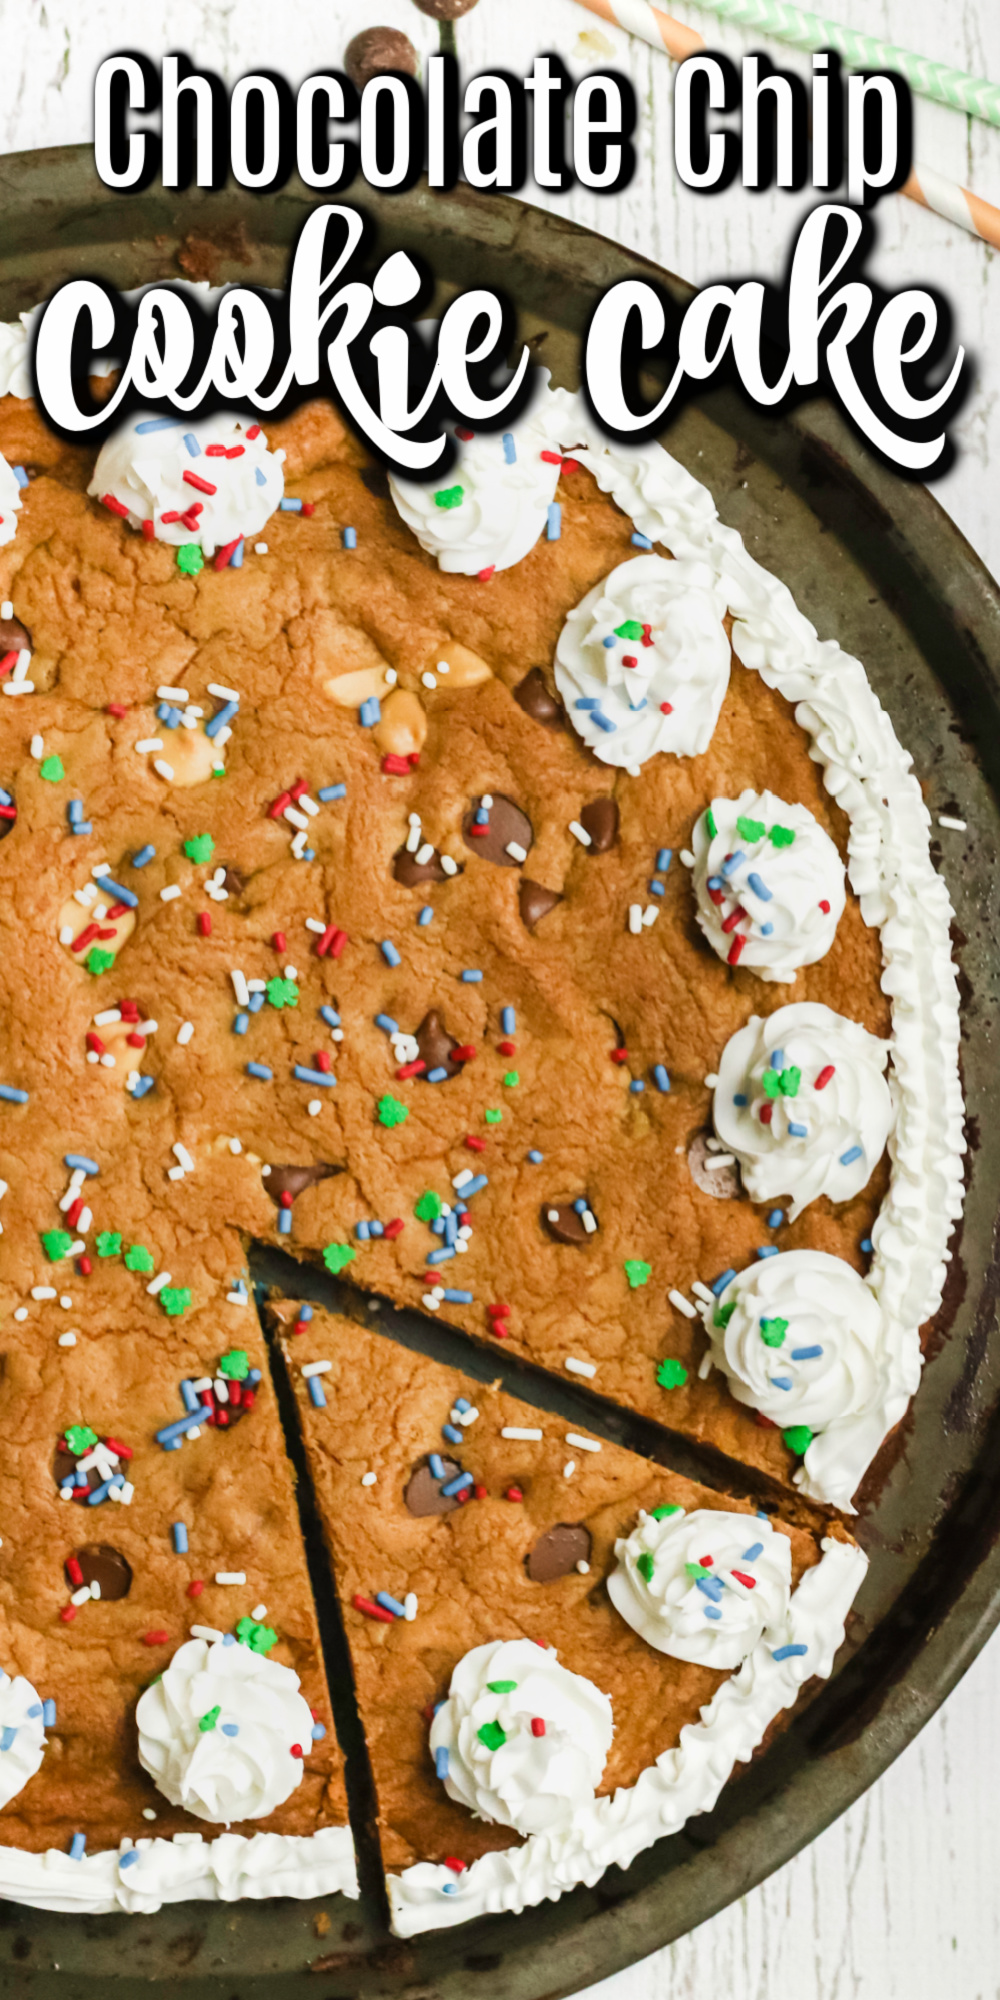 This homemade chocolate chip cookie cake is a fun and delicious dessert. Made with flour, sugar, butter, eggs, and more - it's one of my families' favorite requested birthday cakes. If you're looking for a fun and unique birthday cake, grab the recipe for this homemade cookie cake.